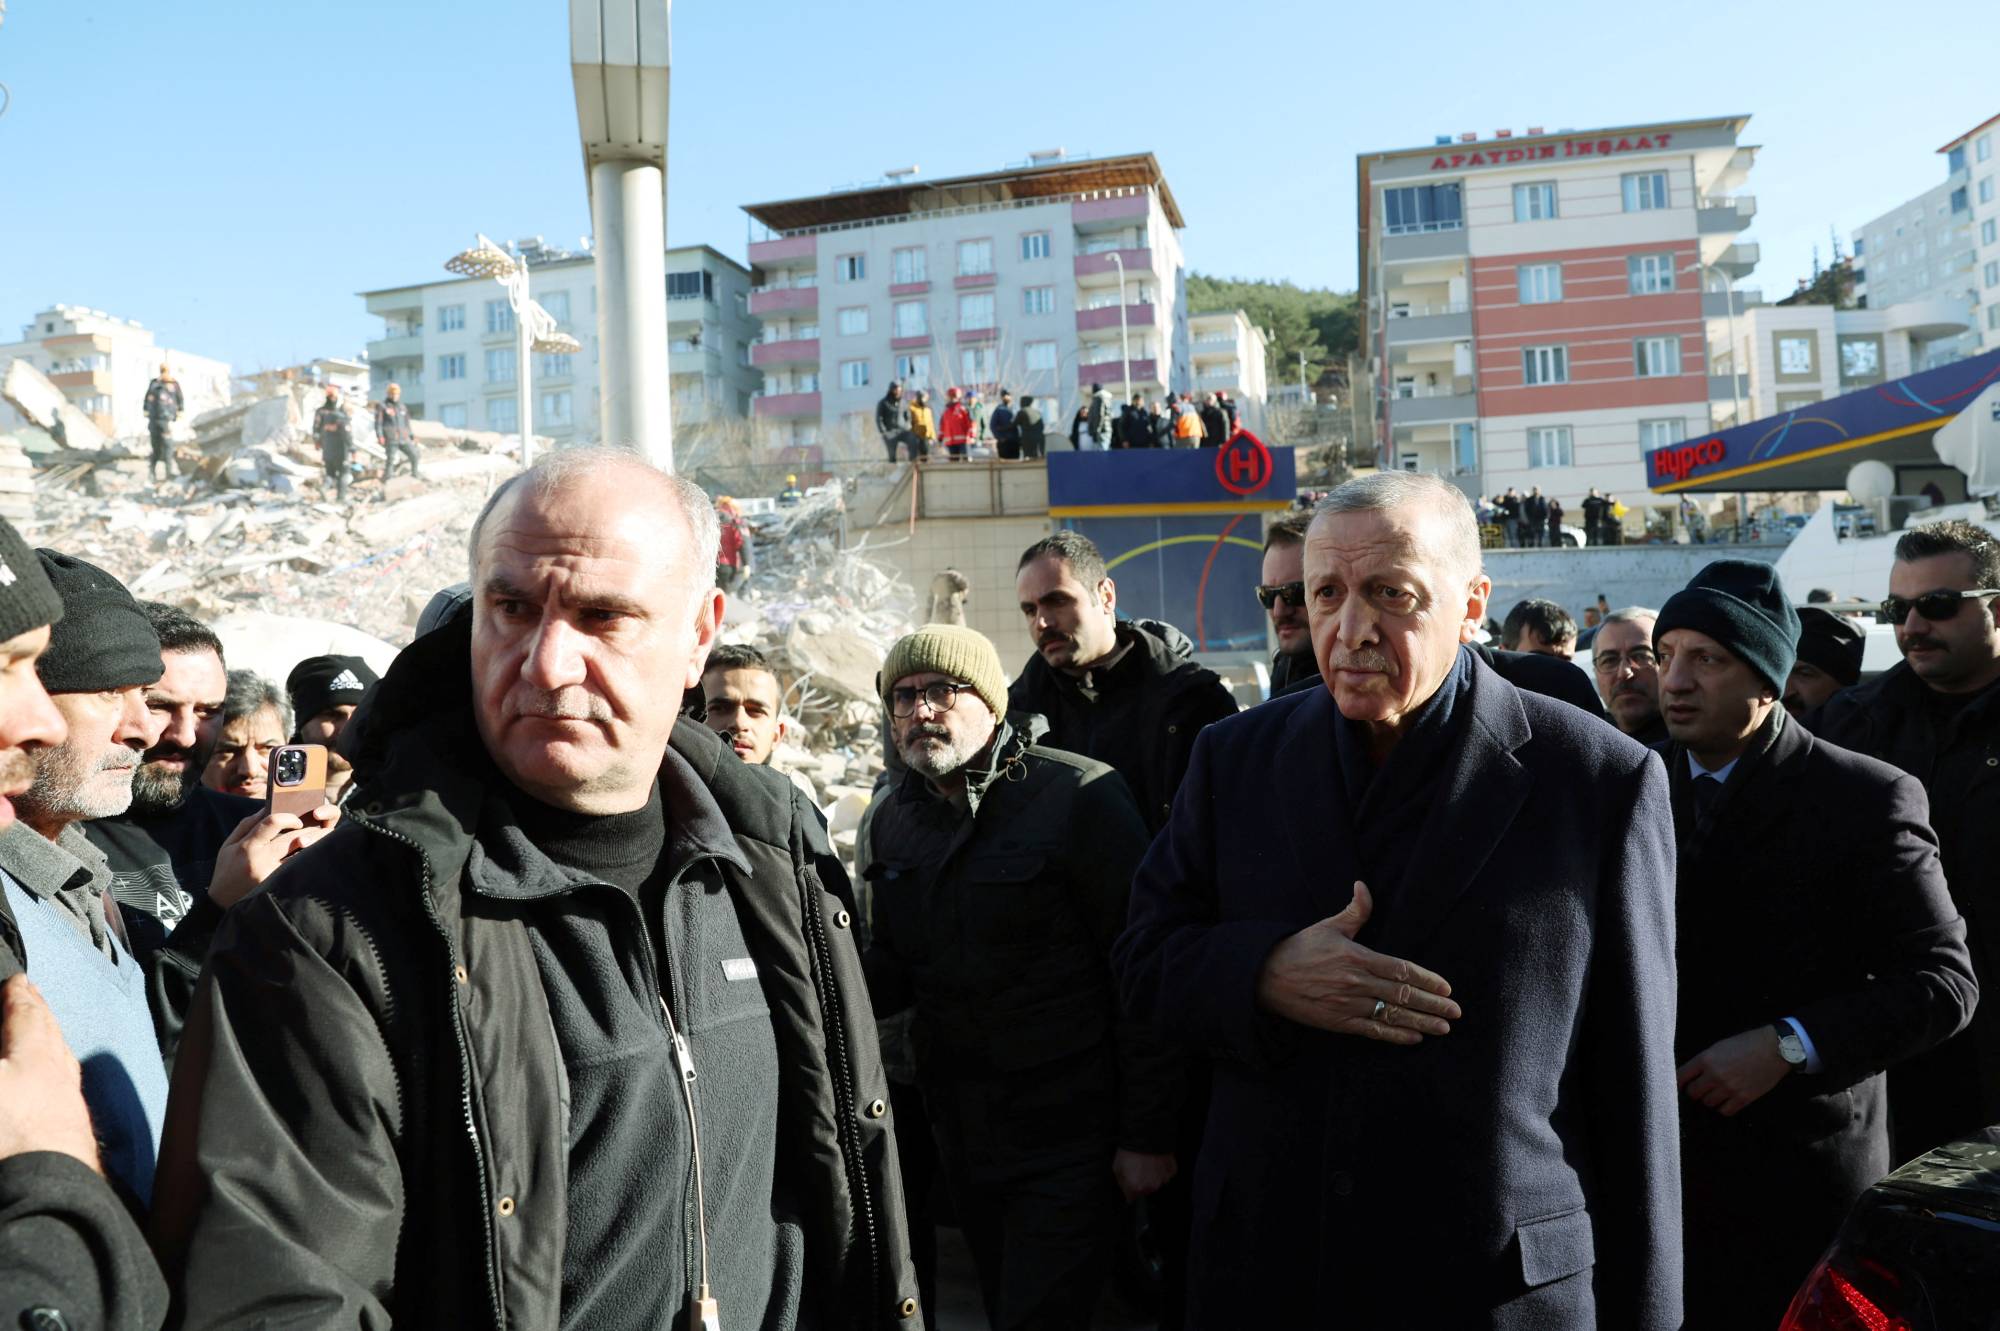 Turkish President Recep Tayyip Erdogan inspects damage in the aftermath of a deadly earthquake in Kahramanmaras, Turkey, on Wednesday. | PRESIDENTIAL PRESS OFFICE / VIA REUTERS